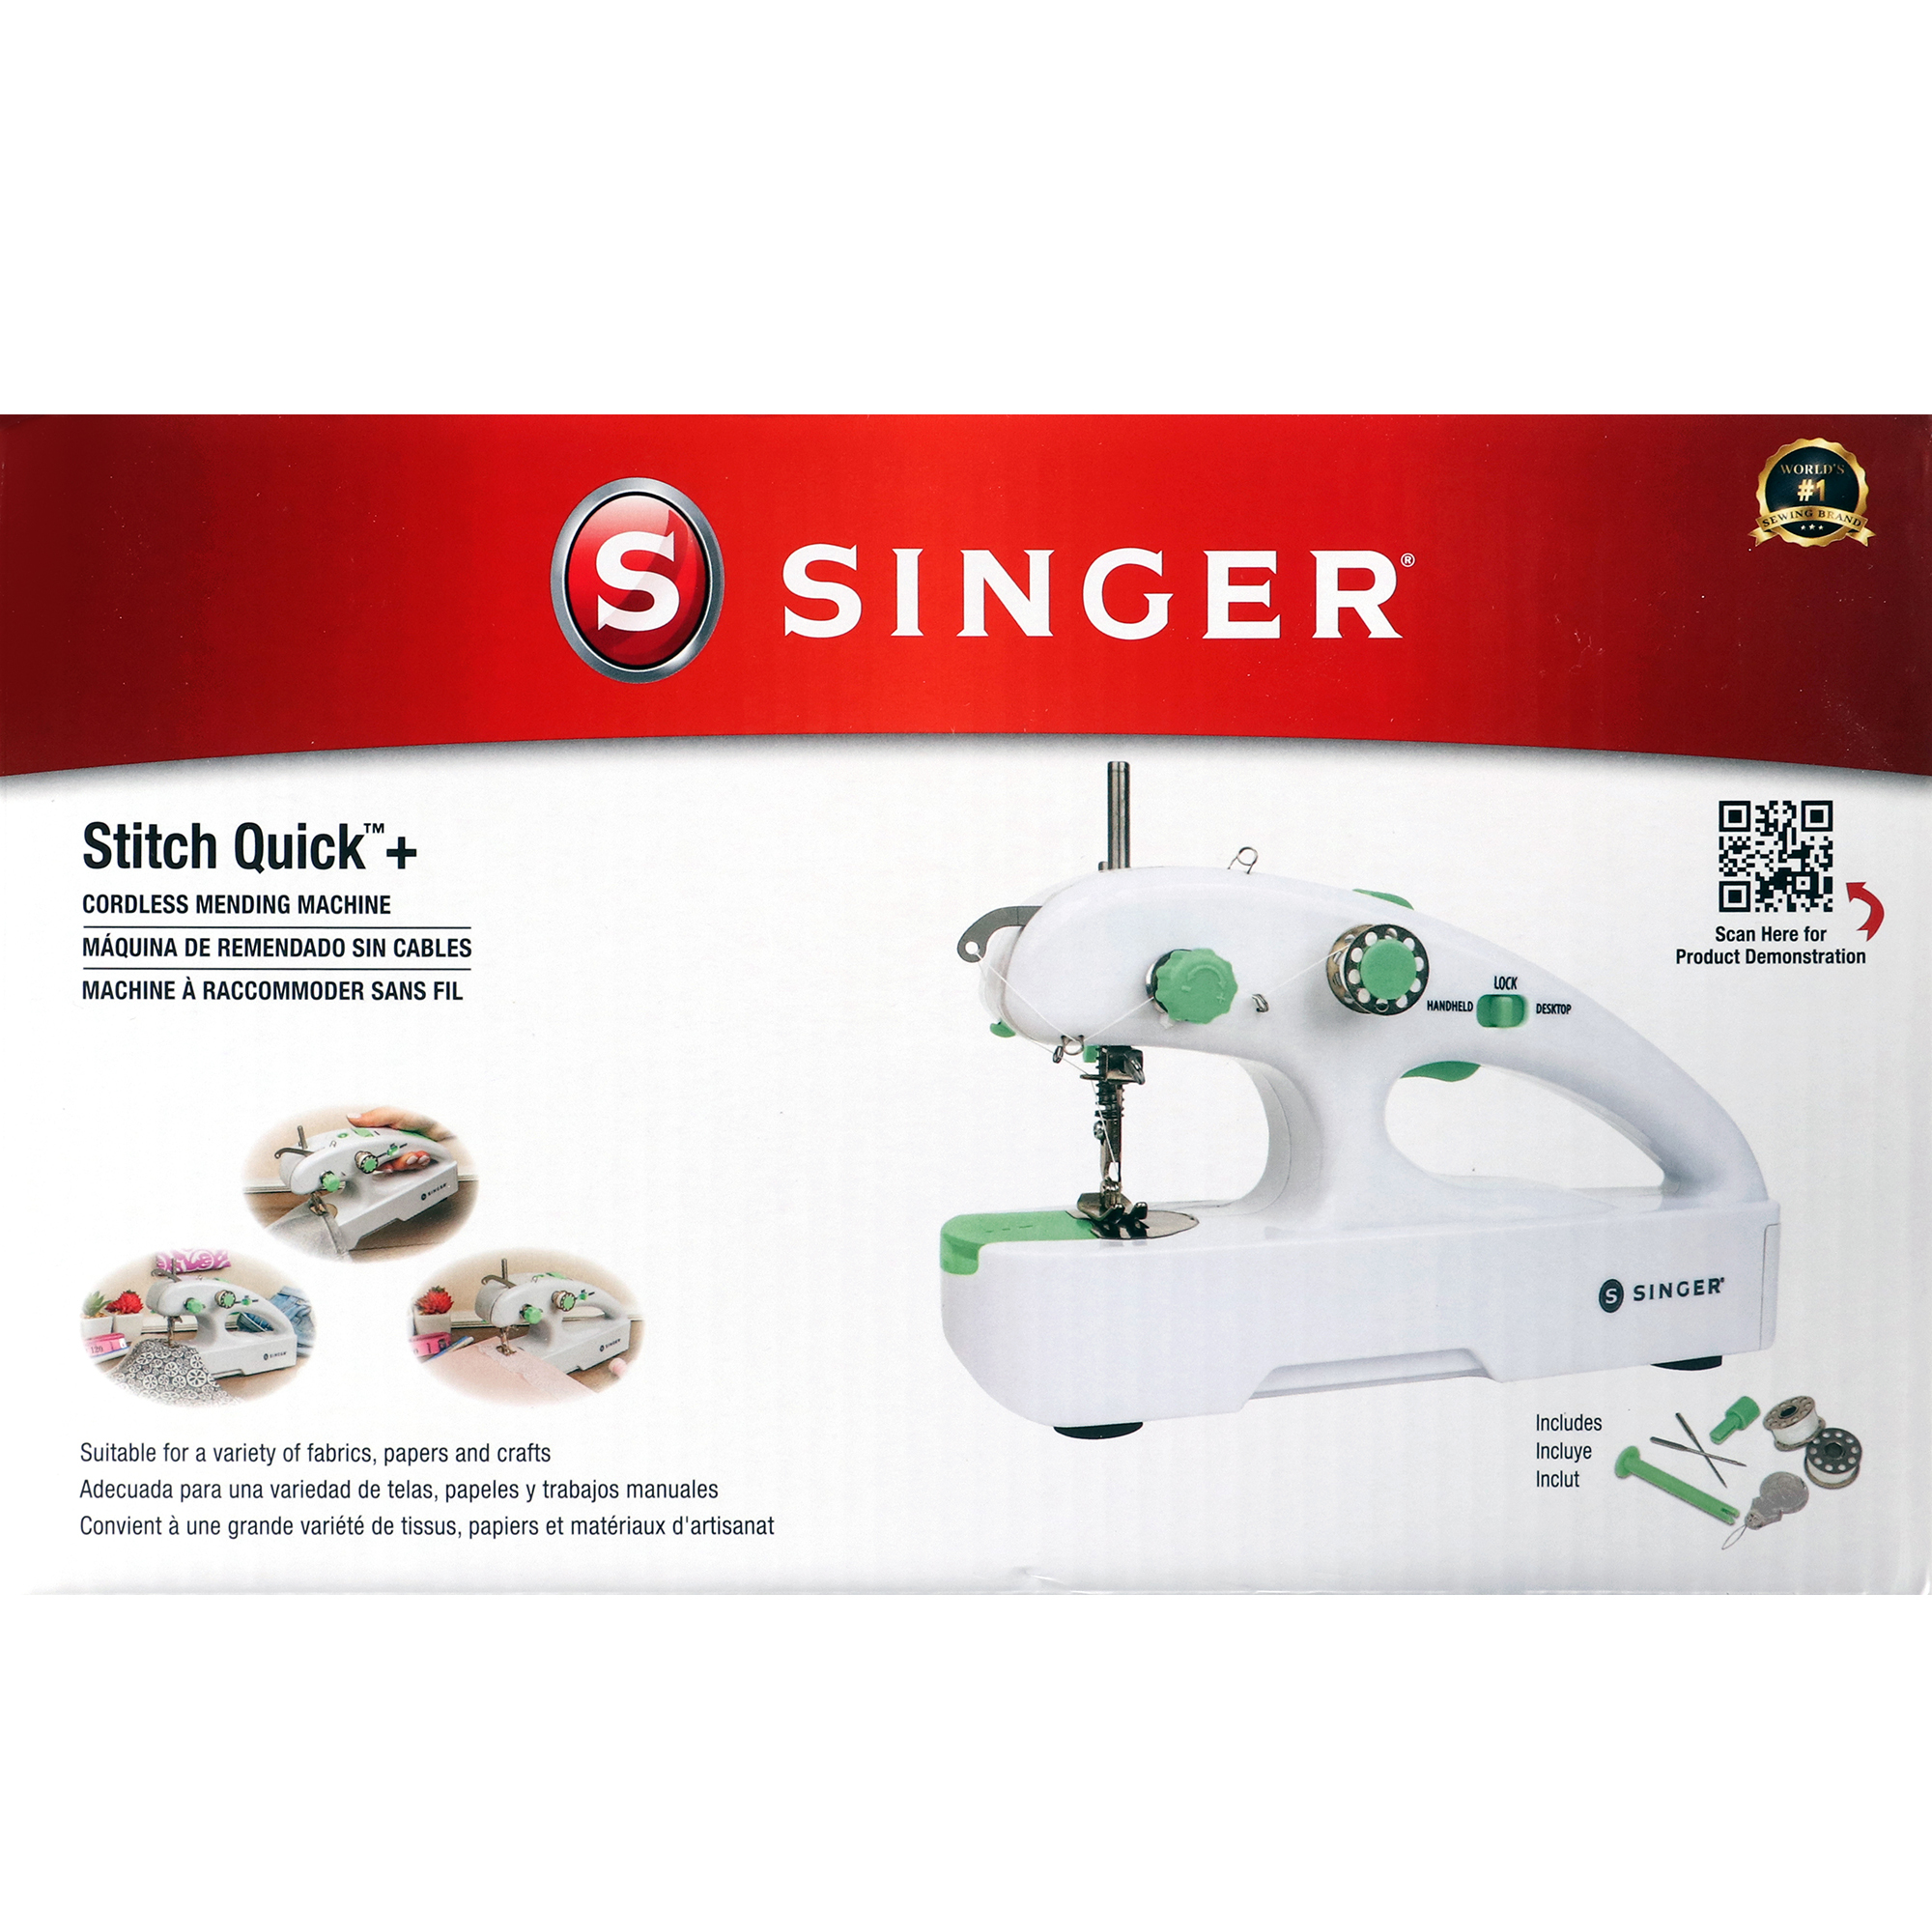 SINGER Stitch Quick Plus Cordless Hand Held Mending Portable Sewing Machine, Two Thread - image 3 of 14